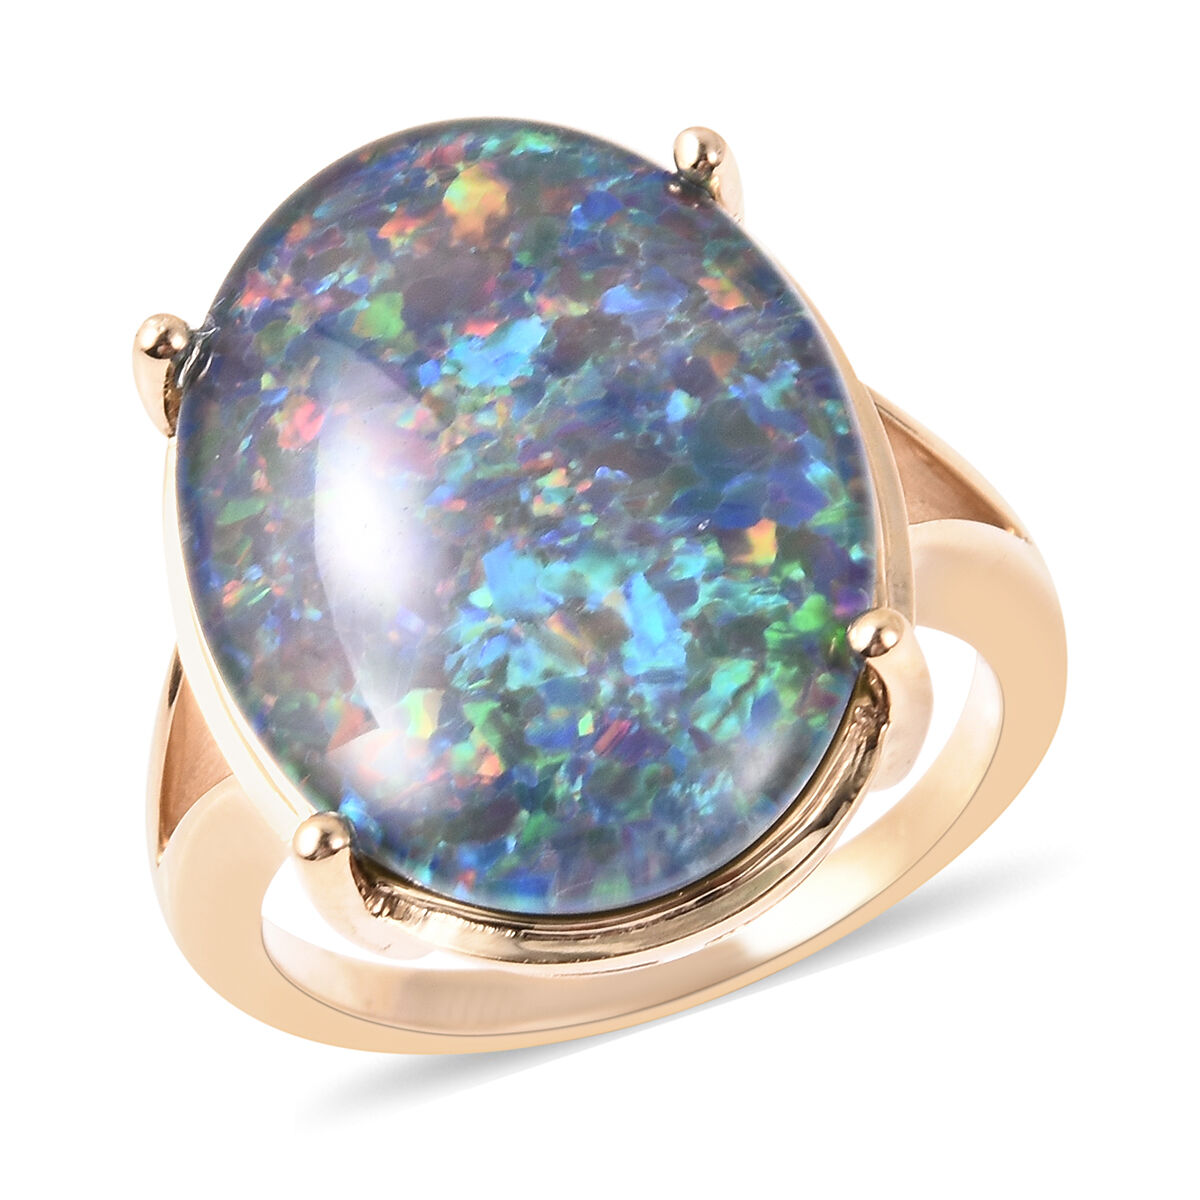 Rare AAA Australian Boulder Opal with Cambodian Zircon Princess Diana  Inspired Halo Ring in Sterling Silver 11.28 Ct. - 2972655 - TJC